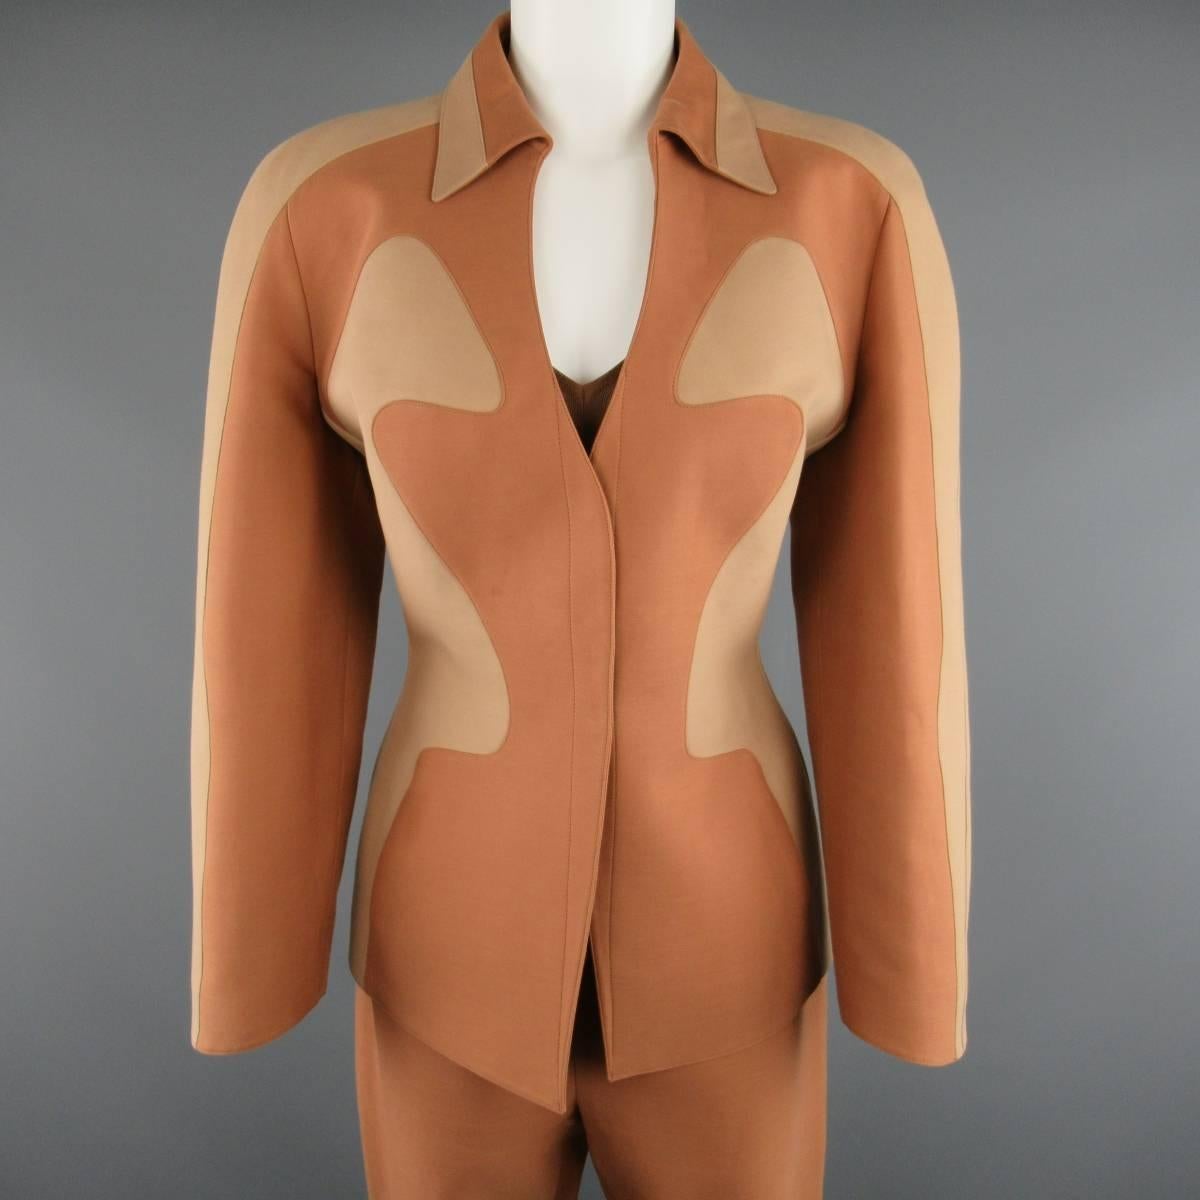 This rare THIERRY MUGLER COUTURE ensemble circa 1980's comes in a rich tan structured cotton fabric and includes an impeccably hourglass structured jacket with two tone beige panels, pointed collar, V neckline and snap closure, short sleeved sheer